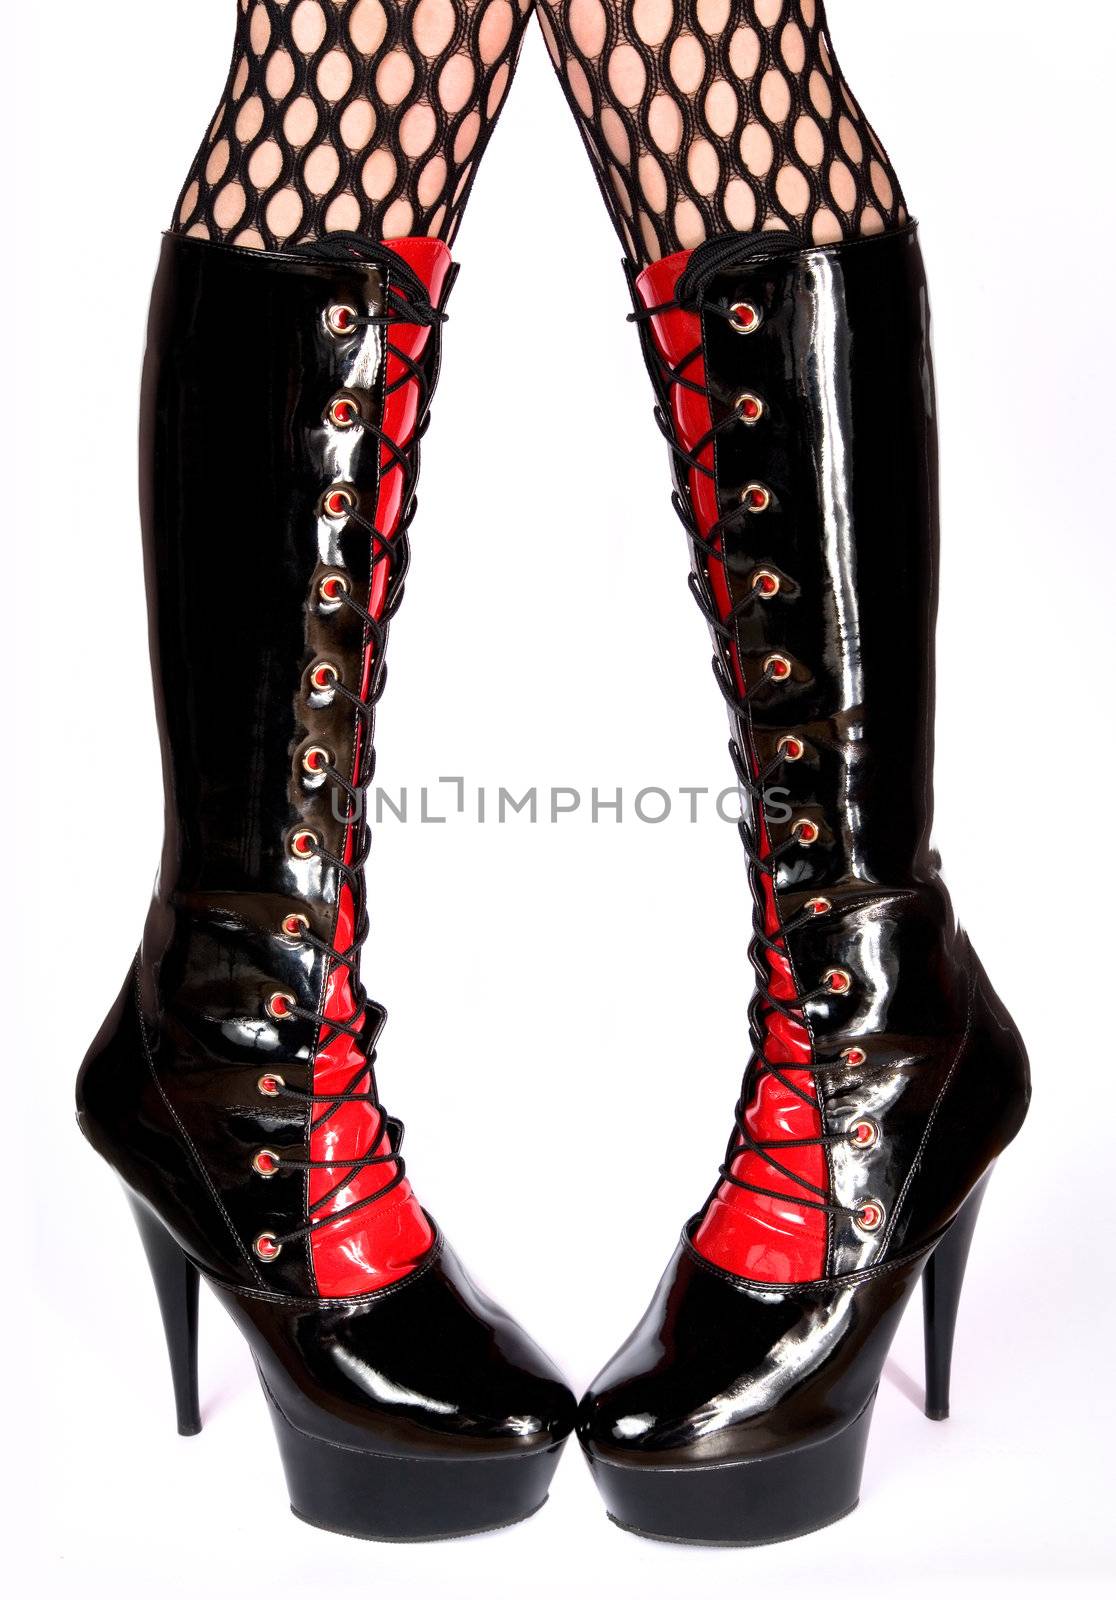 Female legs in fetish boots  by Elisanth